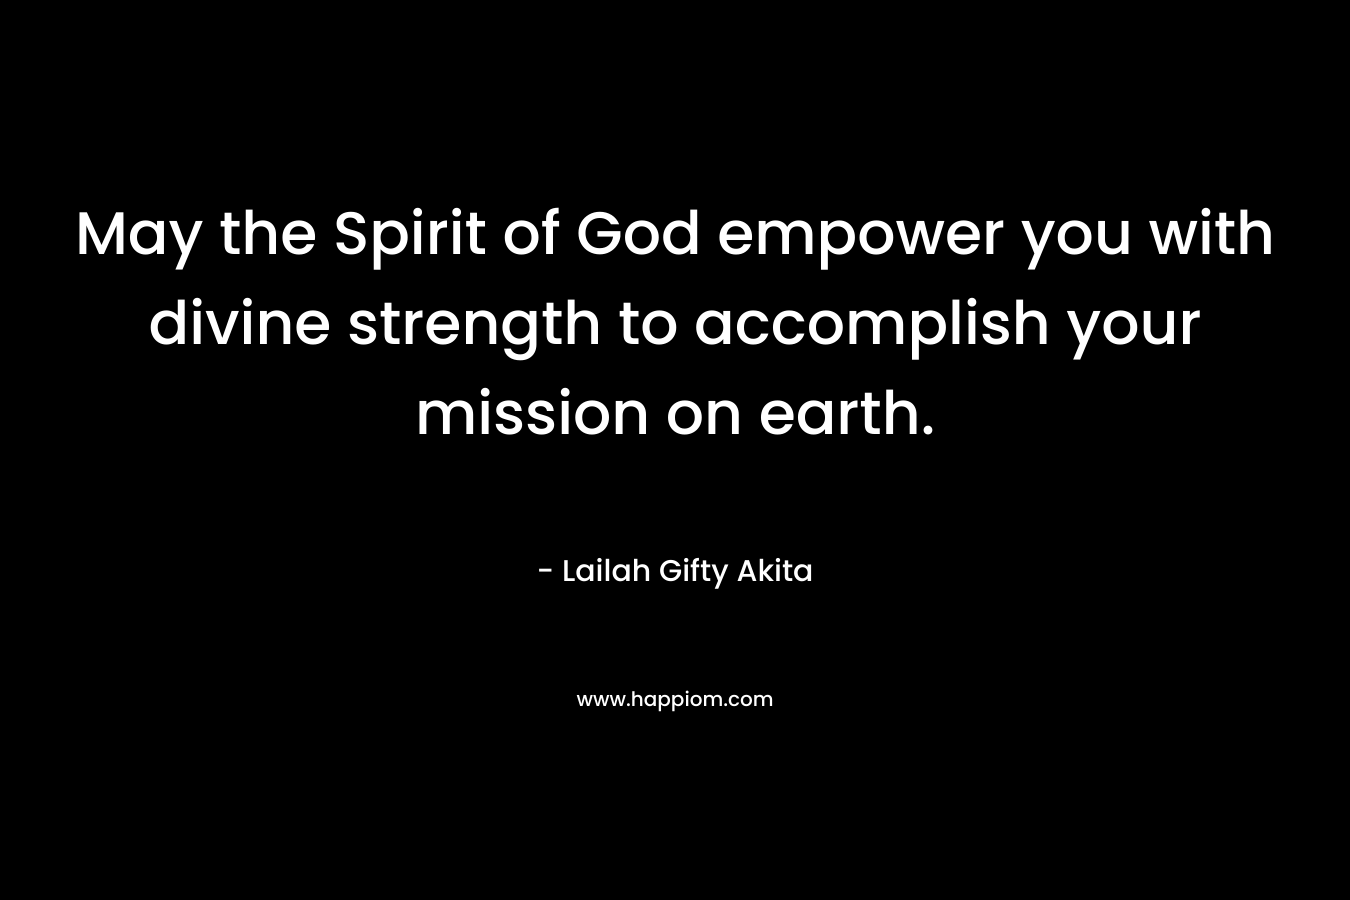 May the Spirit of God empower you with divine strength to accomplish your mission on earth.